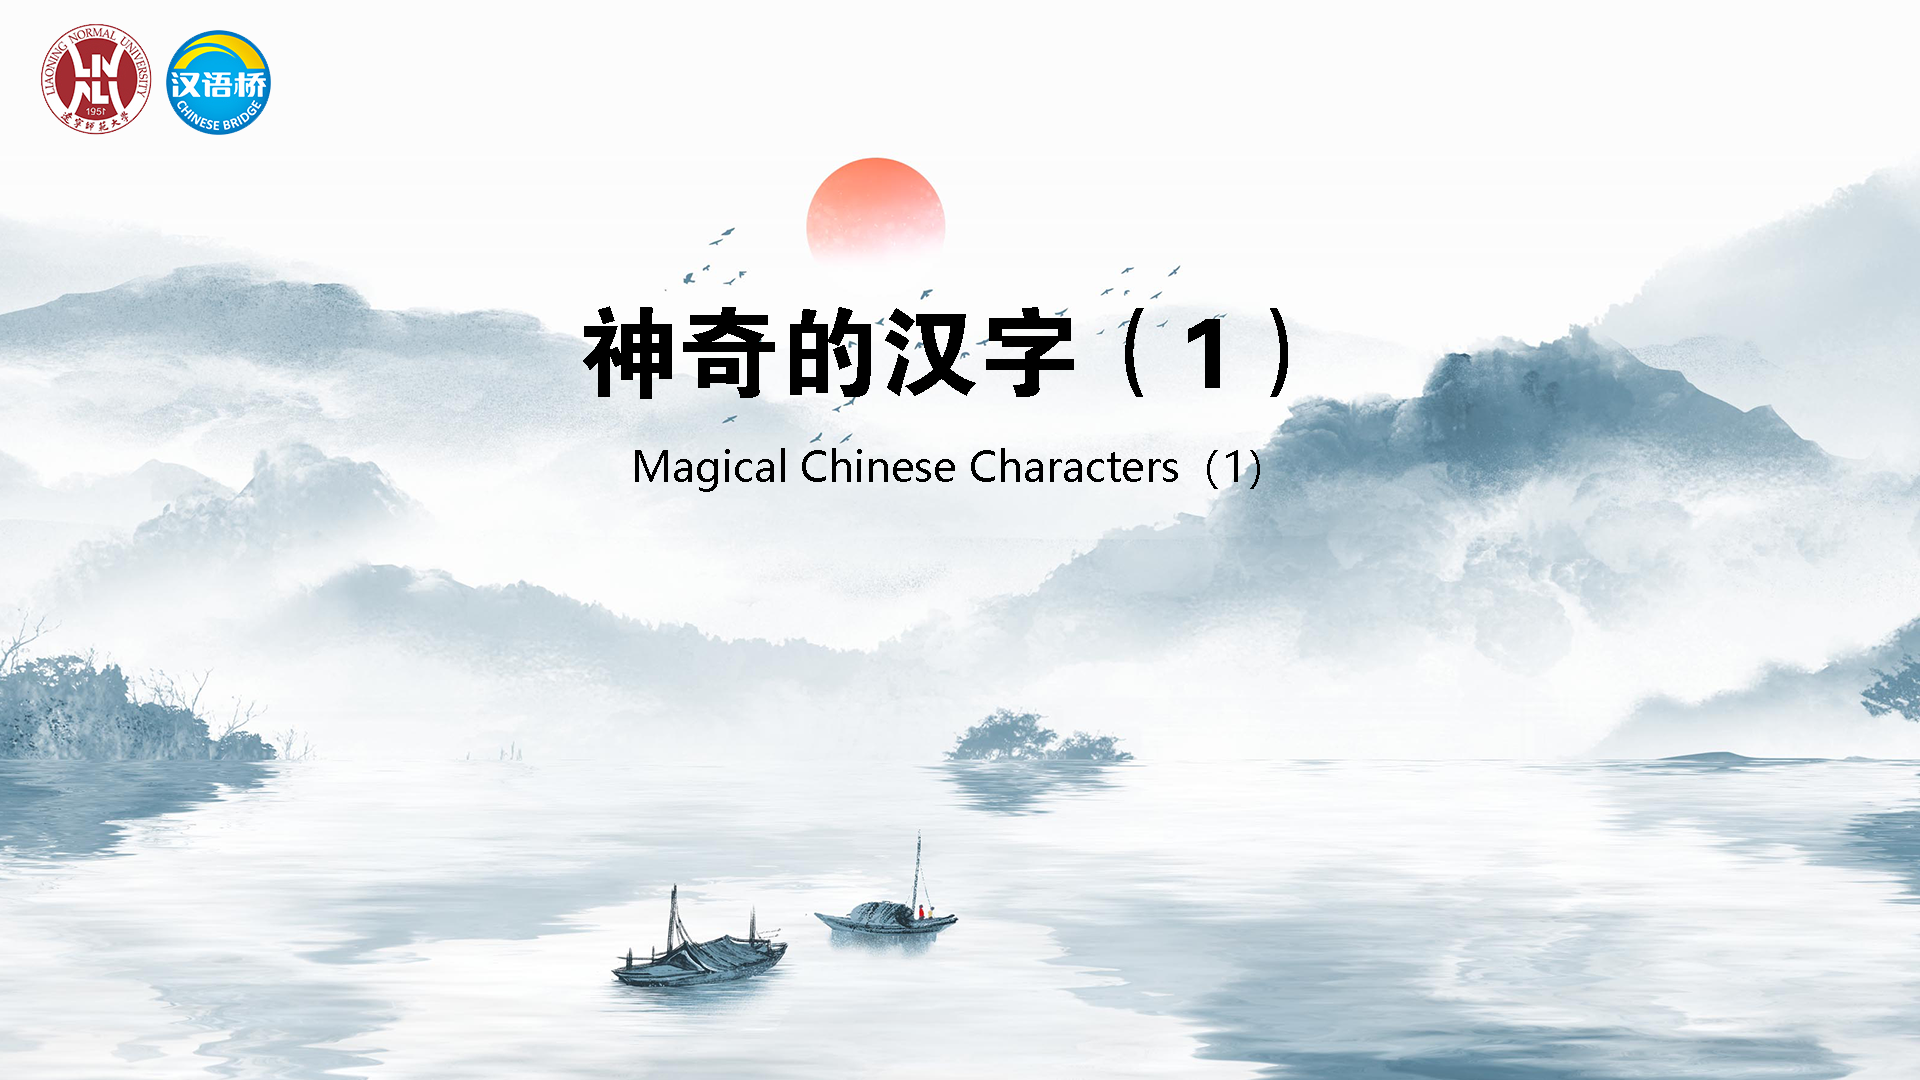 Magical Chinese Characters（1）